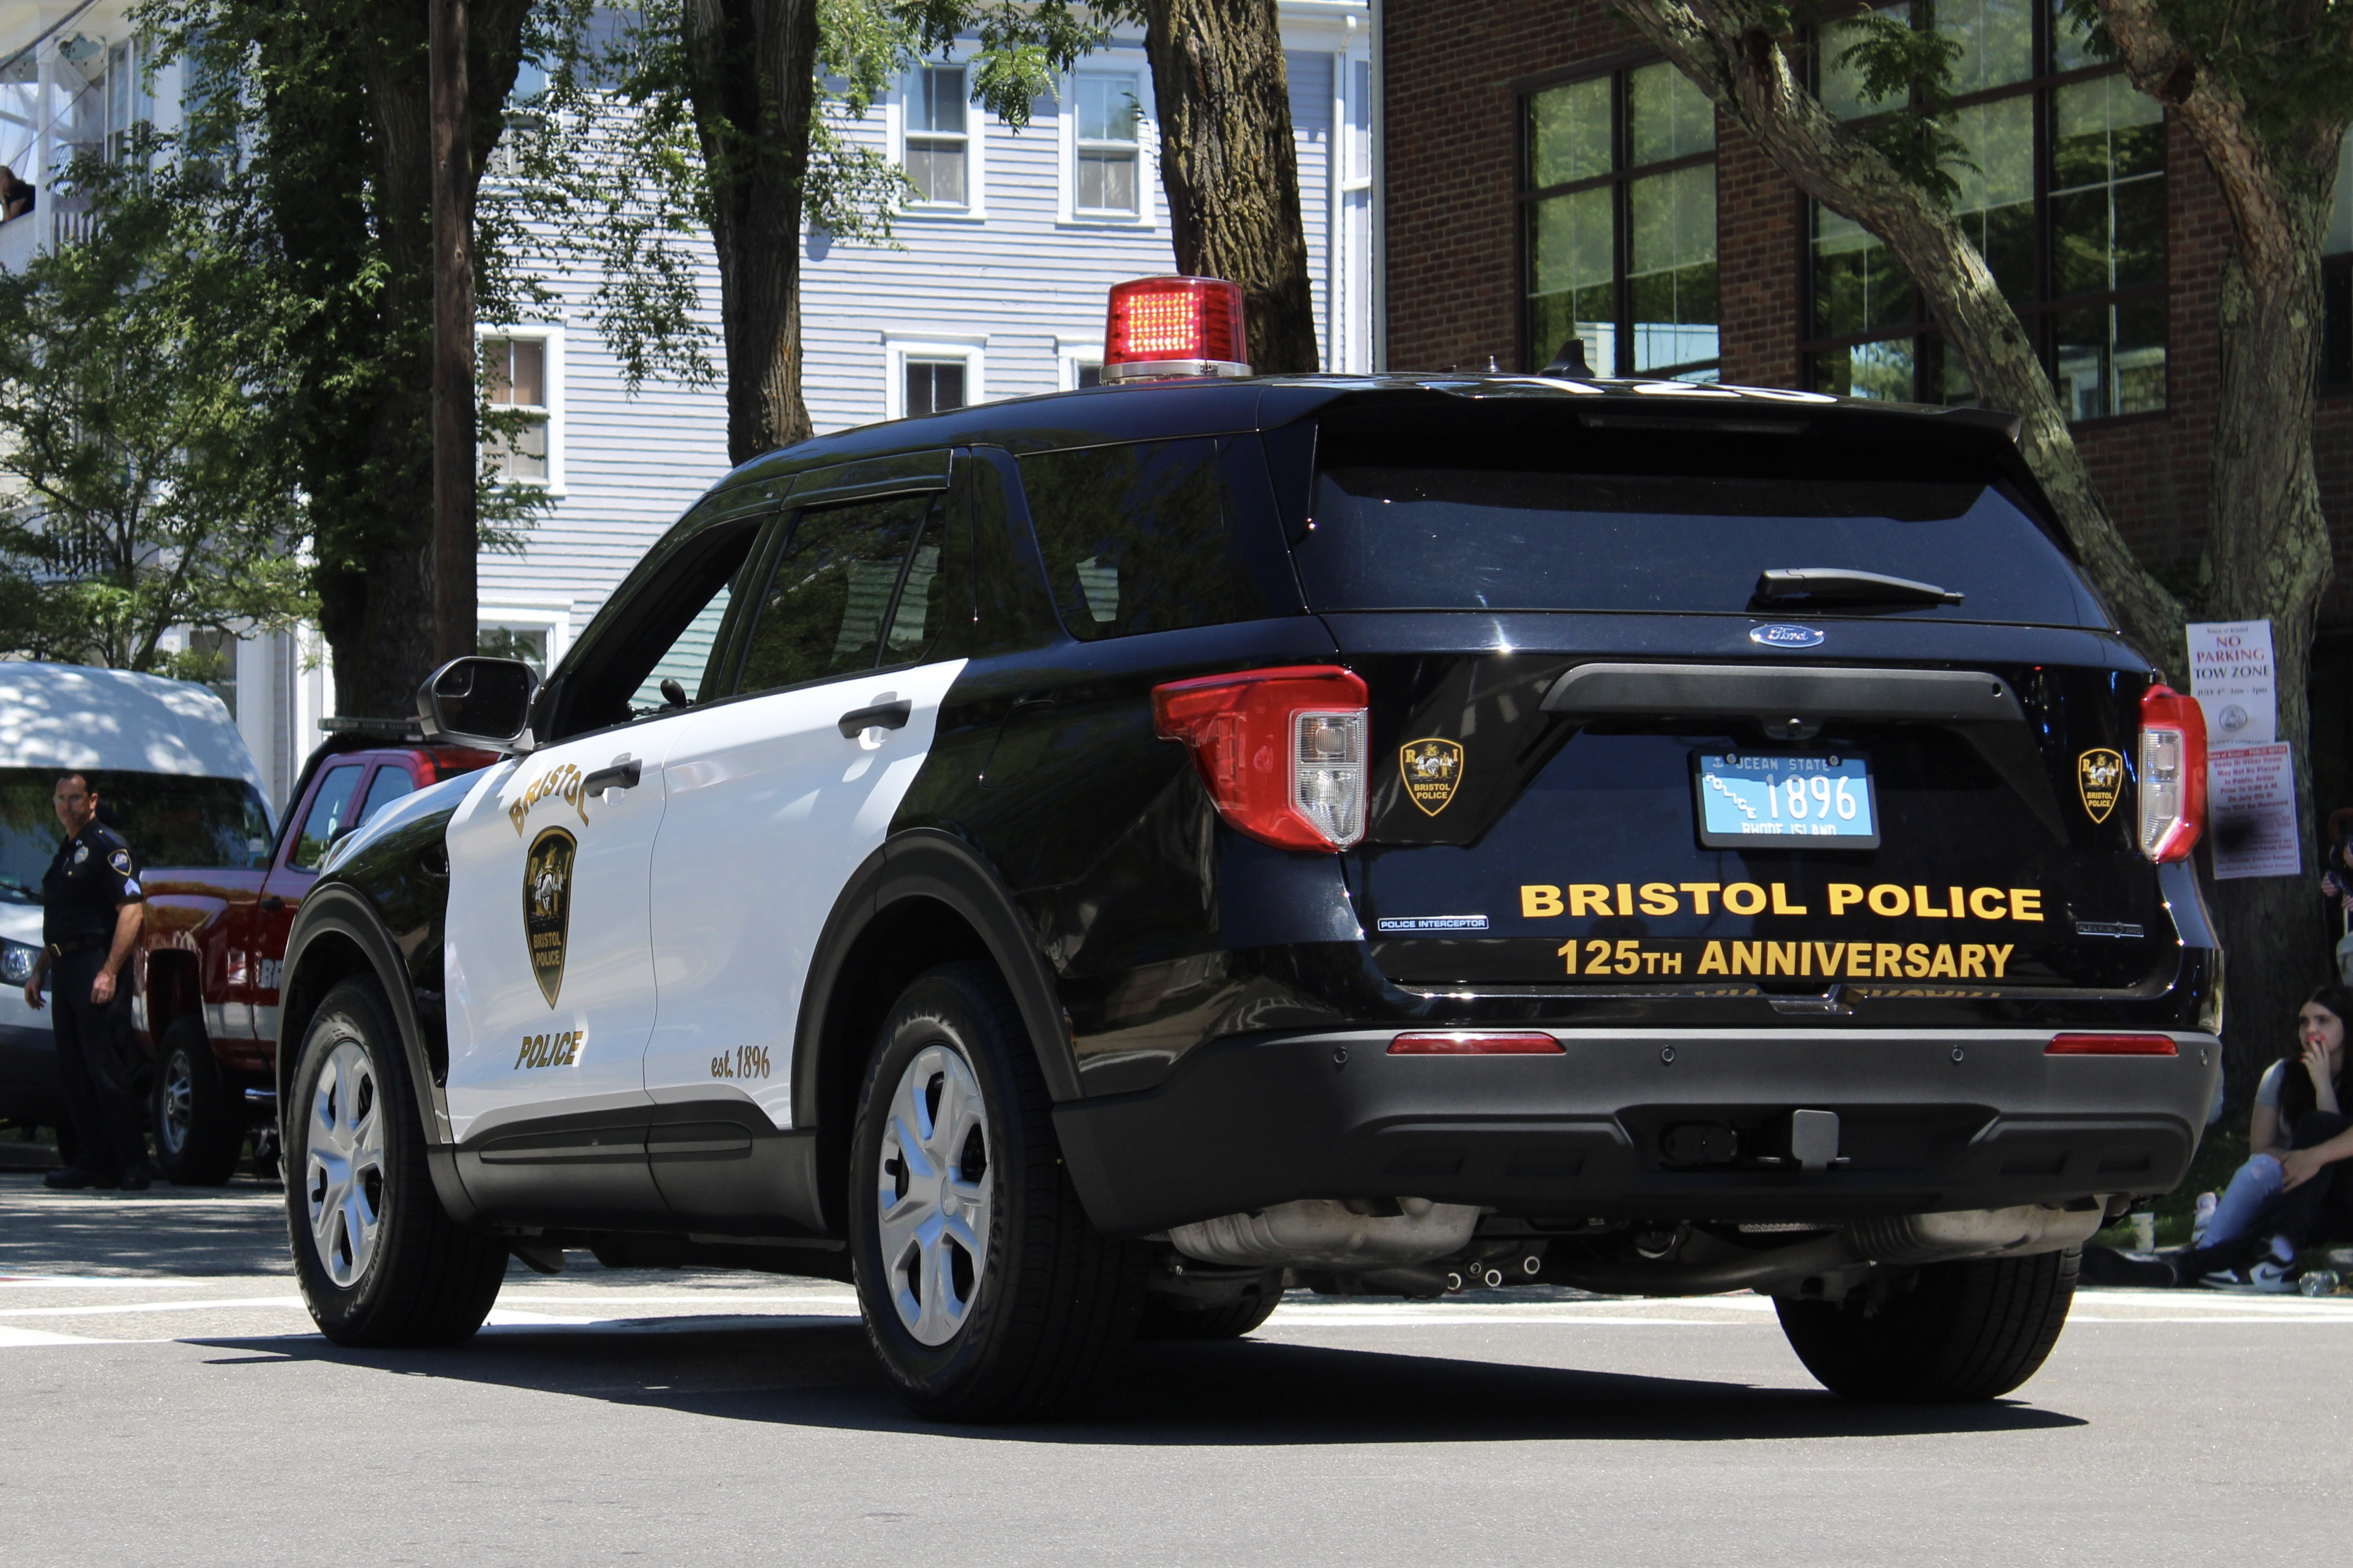 A photo  of Bristol Police
            Cruiser 1896, a 2021 Ford Police Interceptor Utility             taken by @riemergencyvehicles